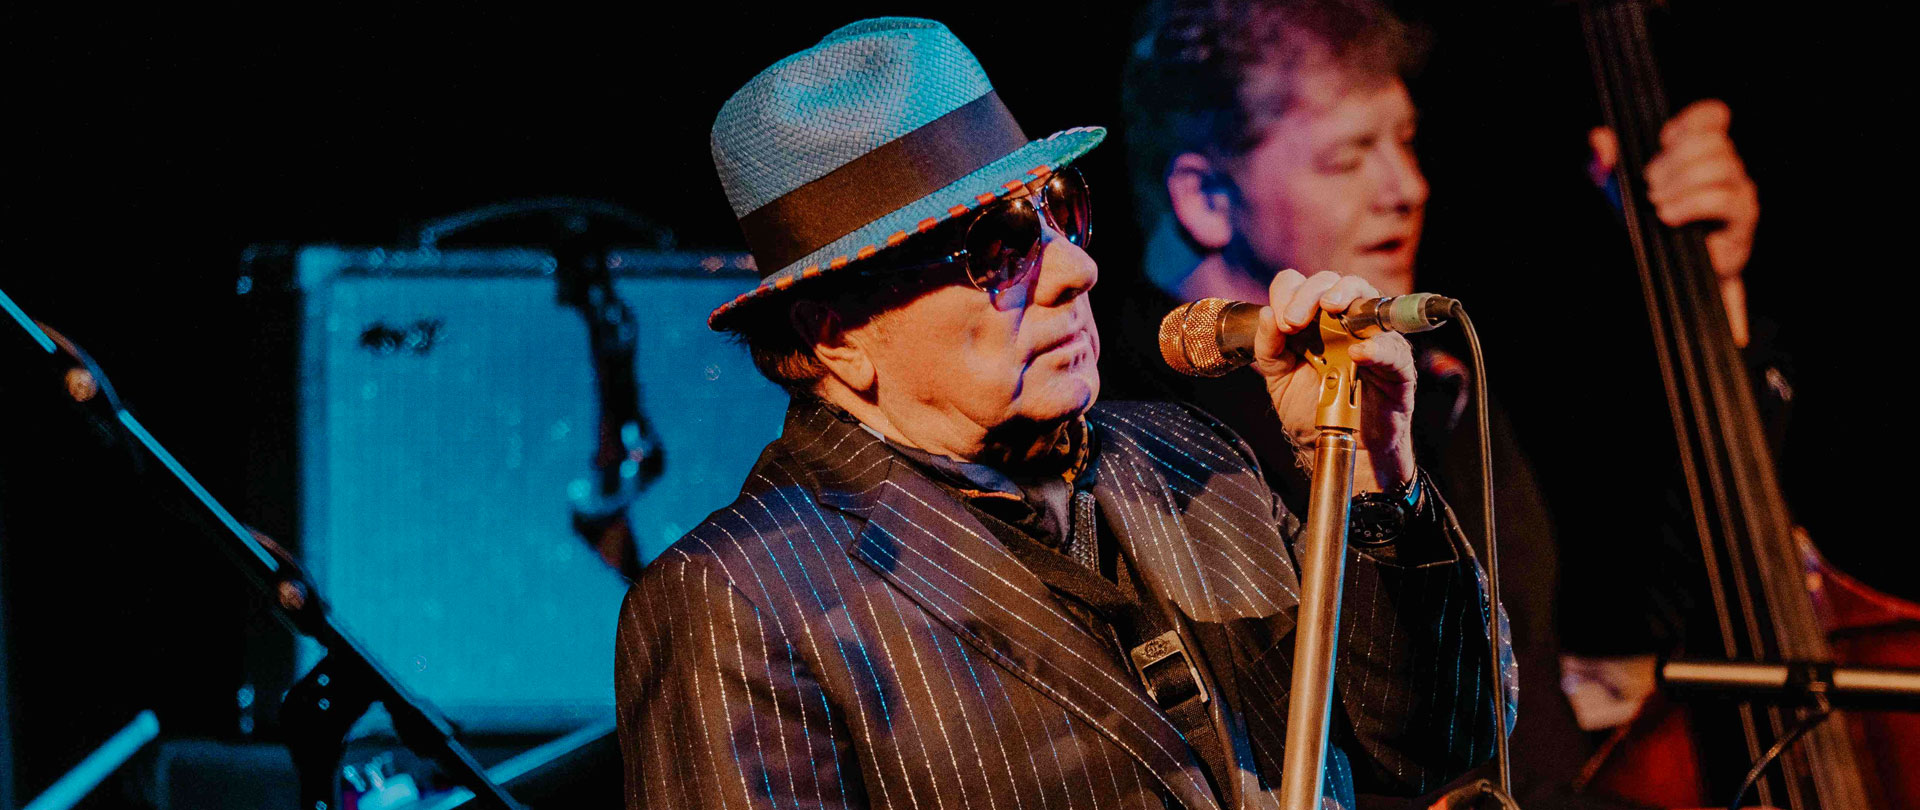 Van Morrison performing live, holding a microphone, wearing a blue hat and shades